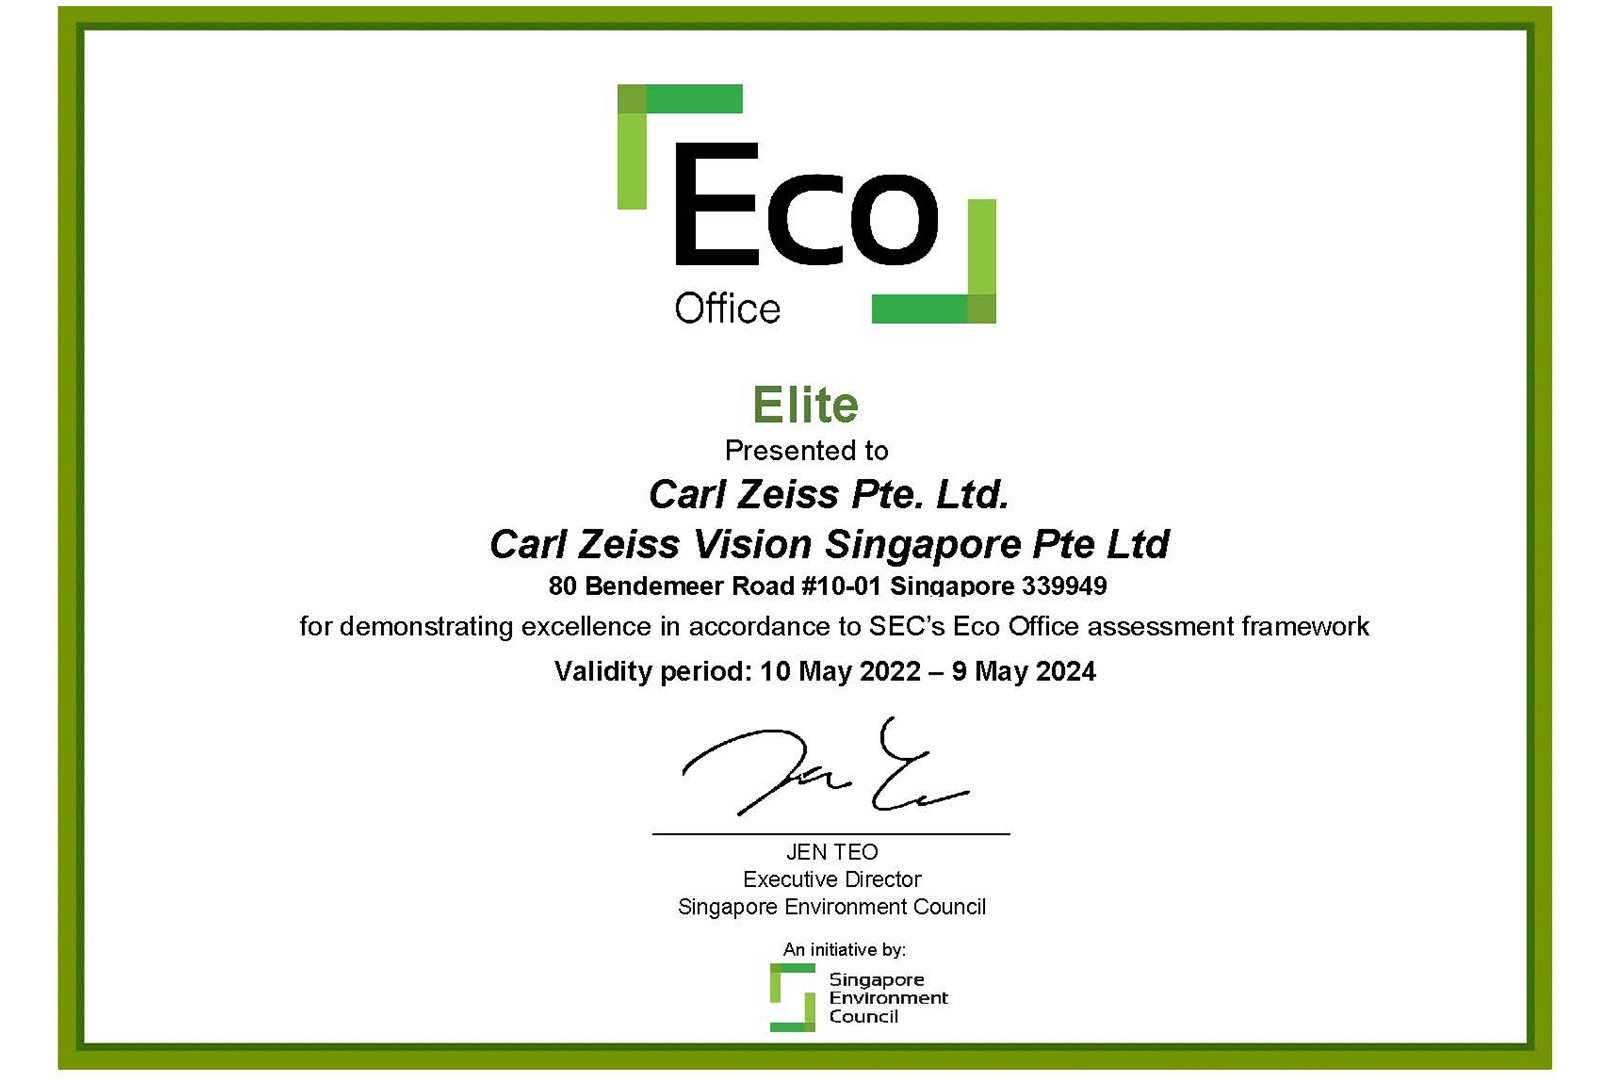 Eco Office certificate presented to Carl Zeiss Pte. Ltd.